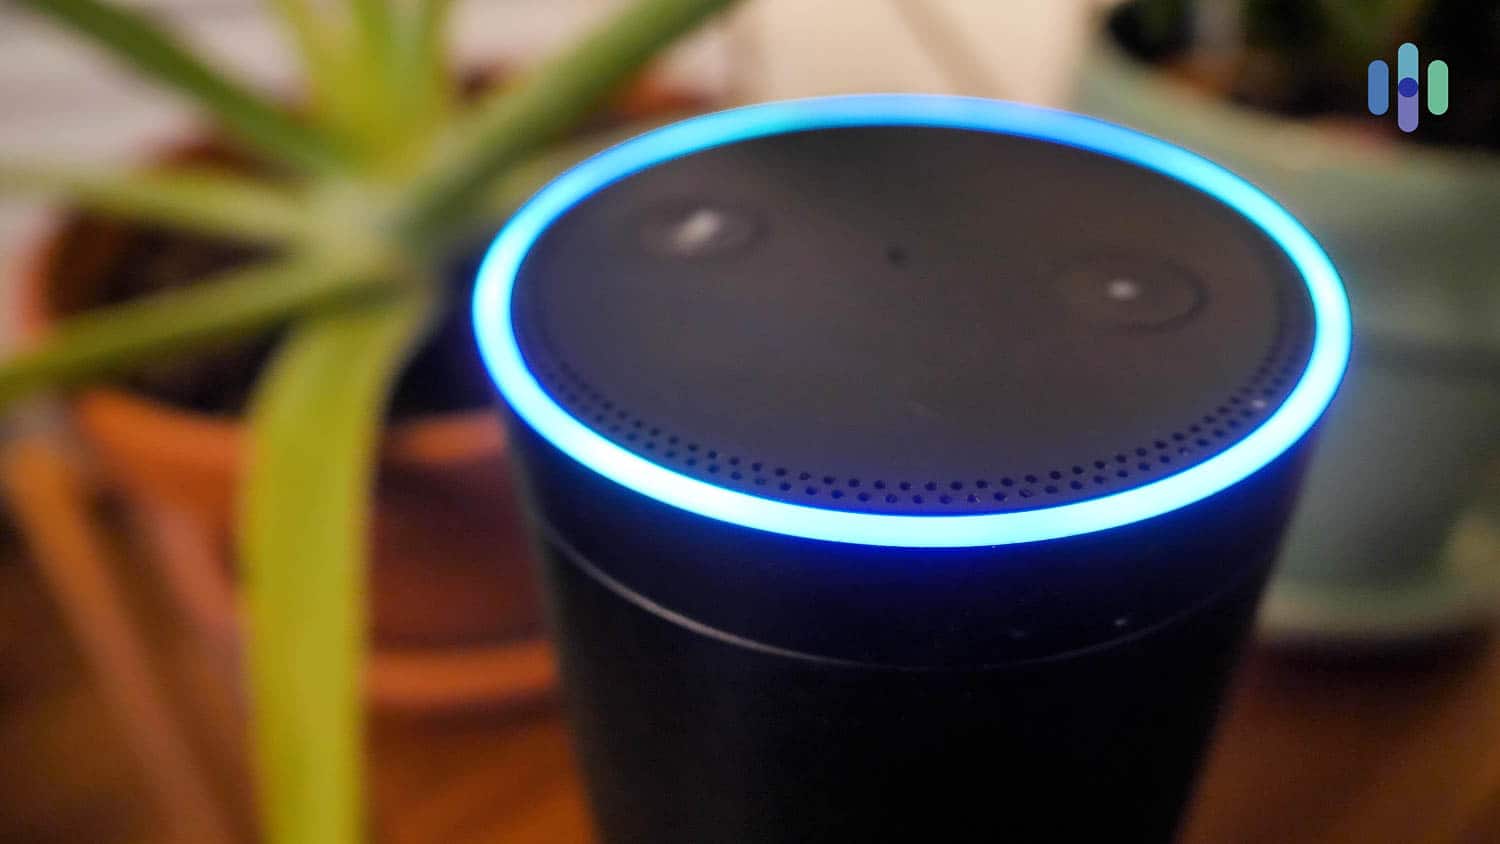 ADT Home Security Integrates with Alexa